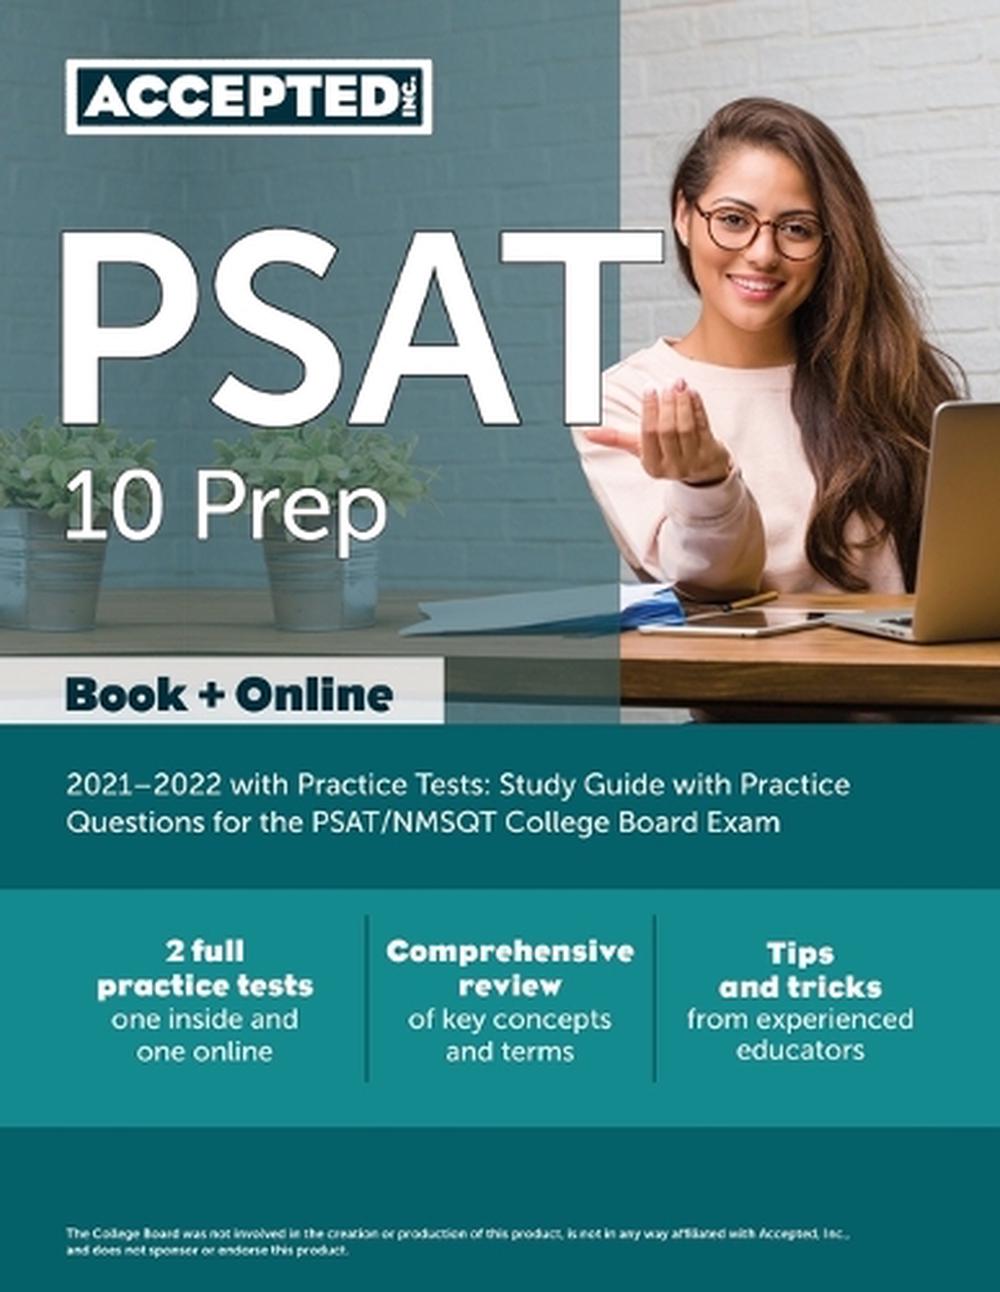 PSAT 10 Prep 20212022 with Practice Tests Study Guide with Practice